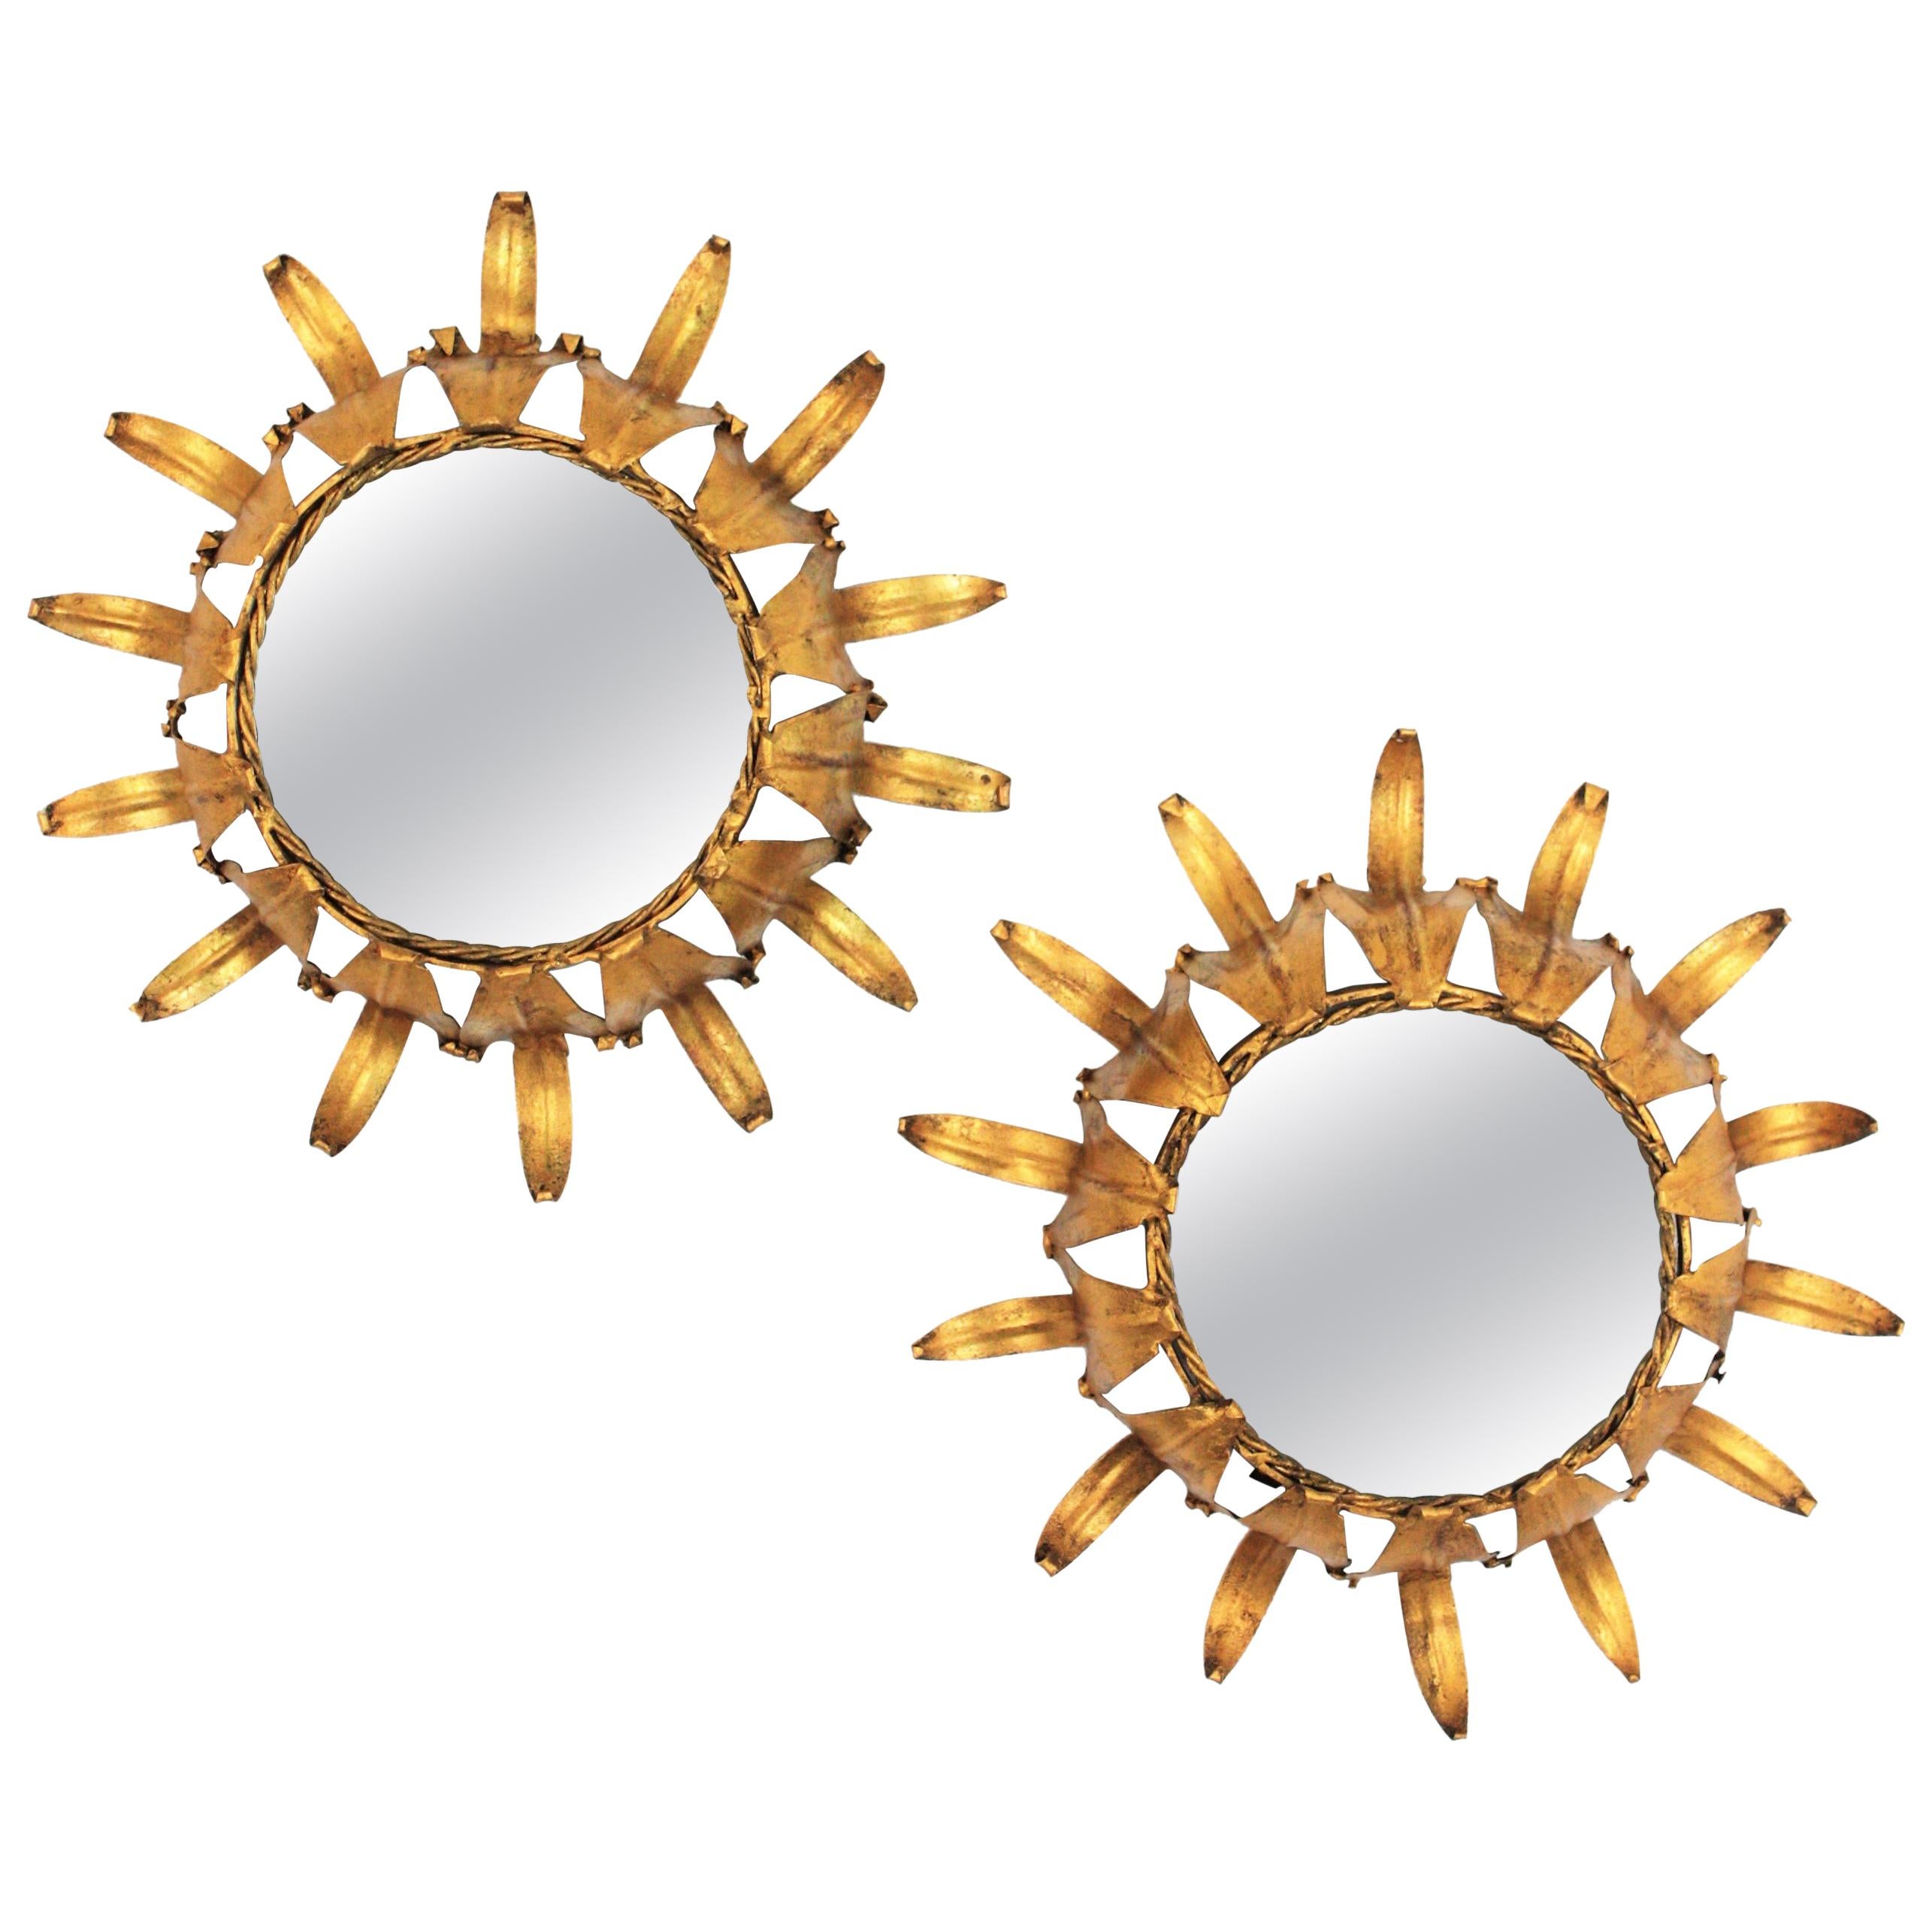 Beautiful pair of hand-hammered gilt iron leafed sunburst mirrors in small size, Spain, 1950s.
Lovely to place together or as a wall composition with other sunburst mirrors in different sizes to add a Hollywood Regency taste to any room.
Overall